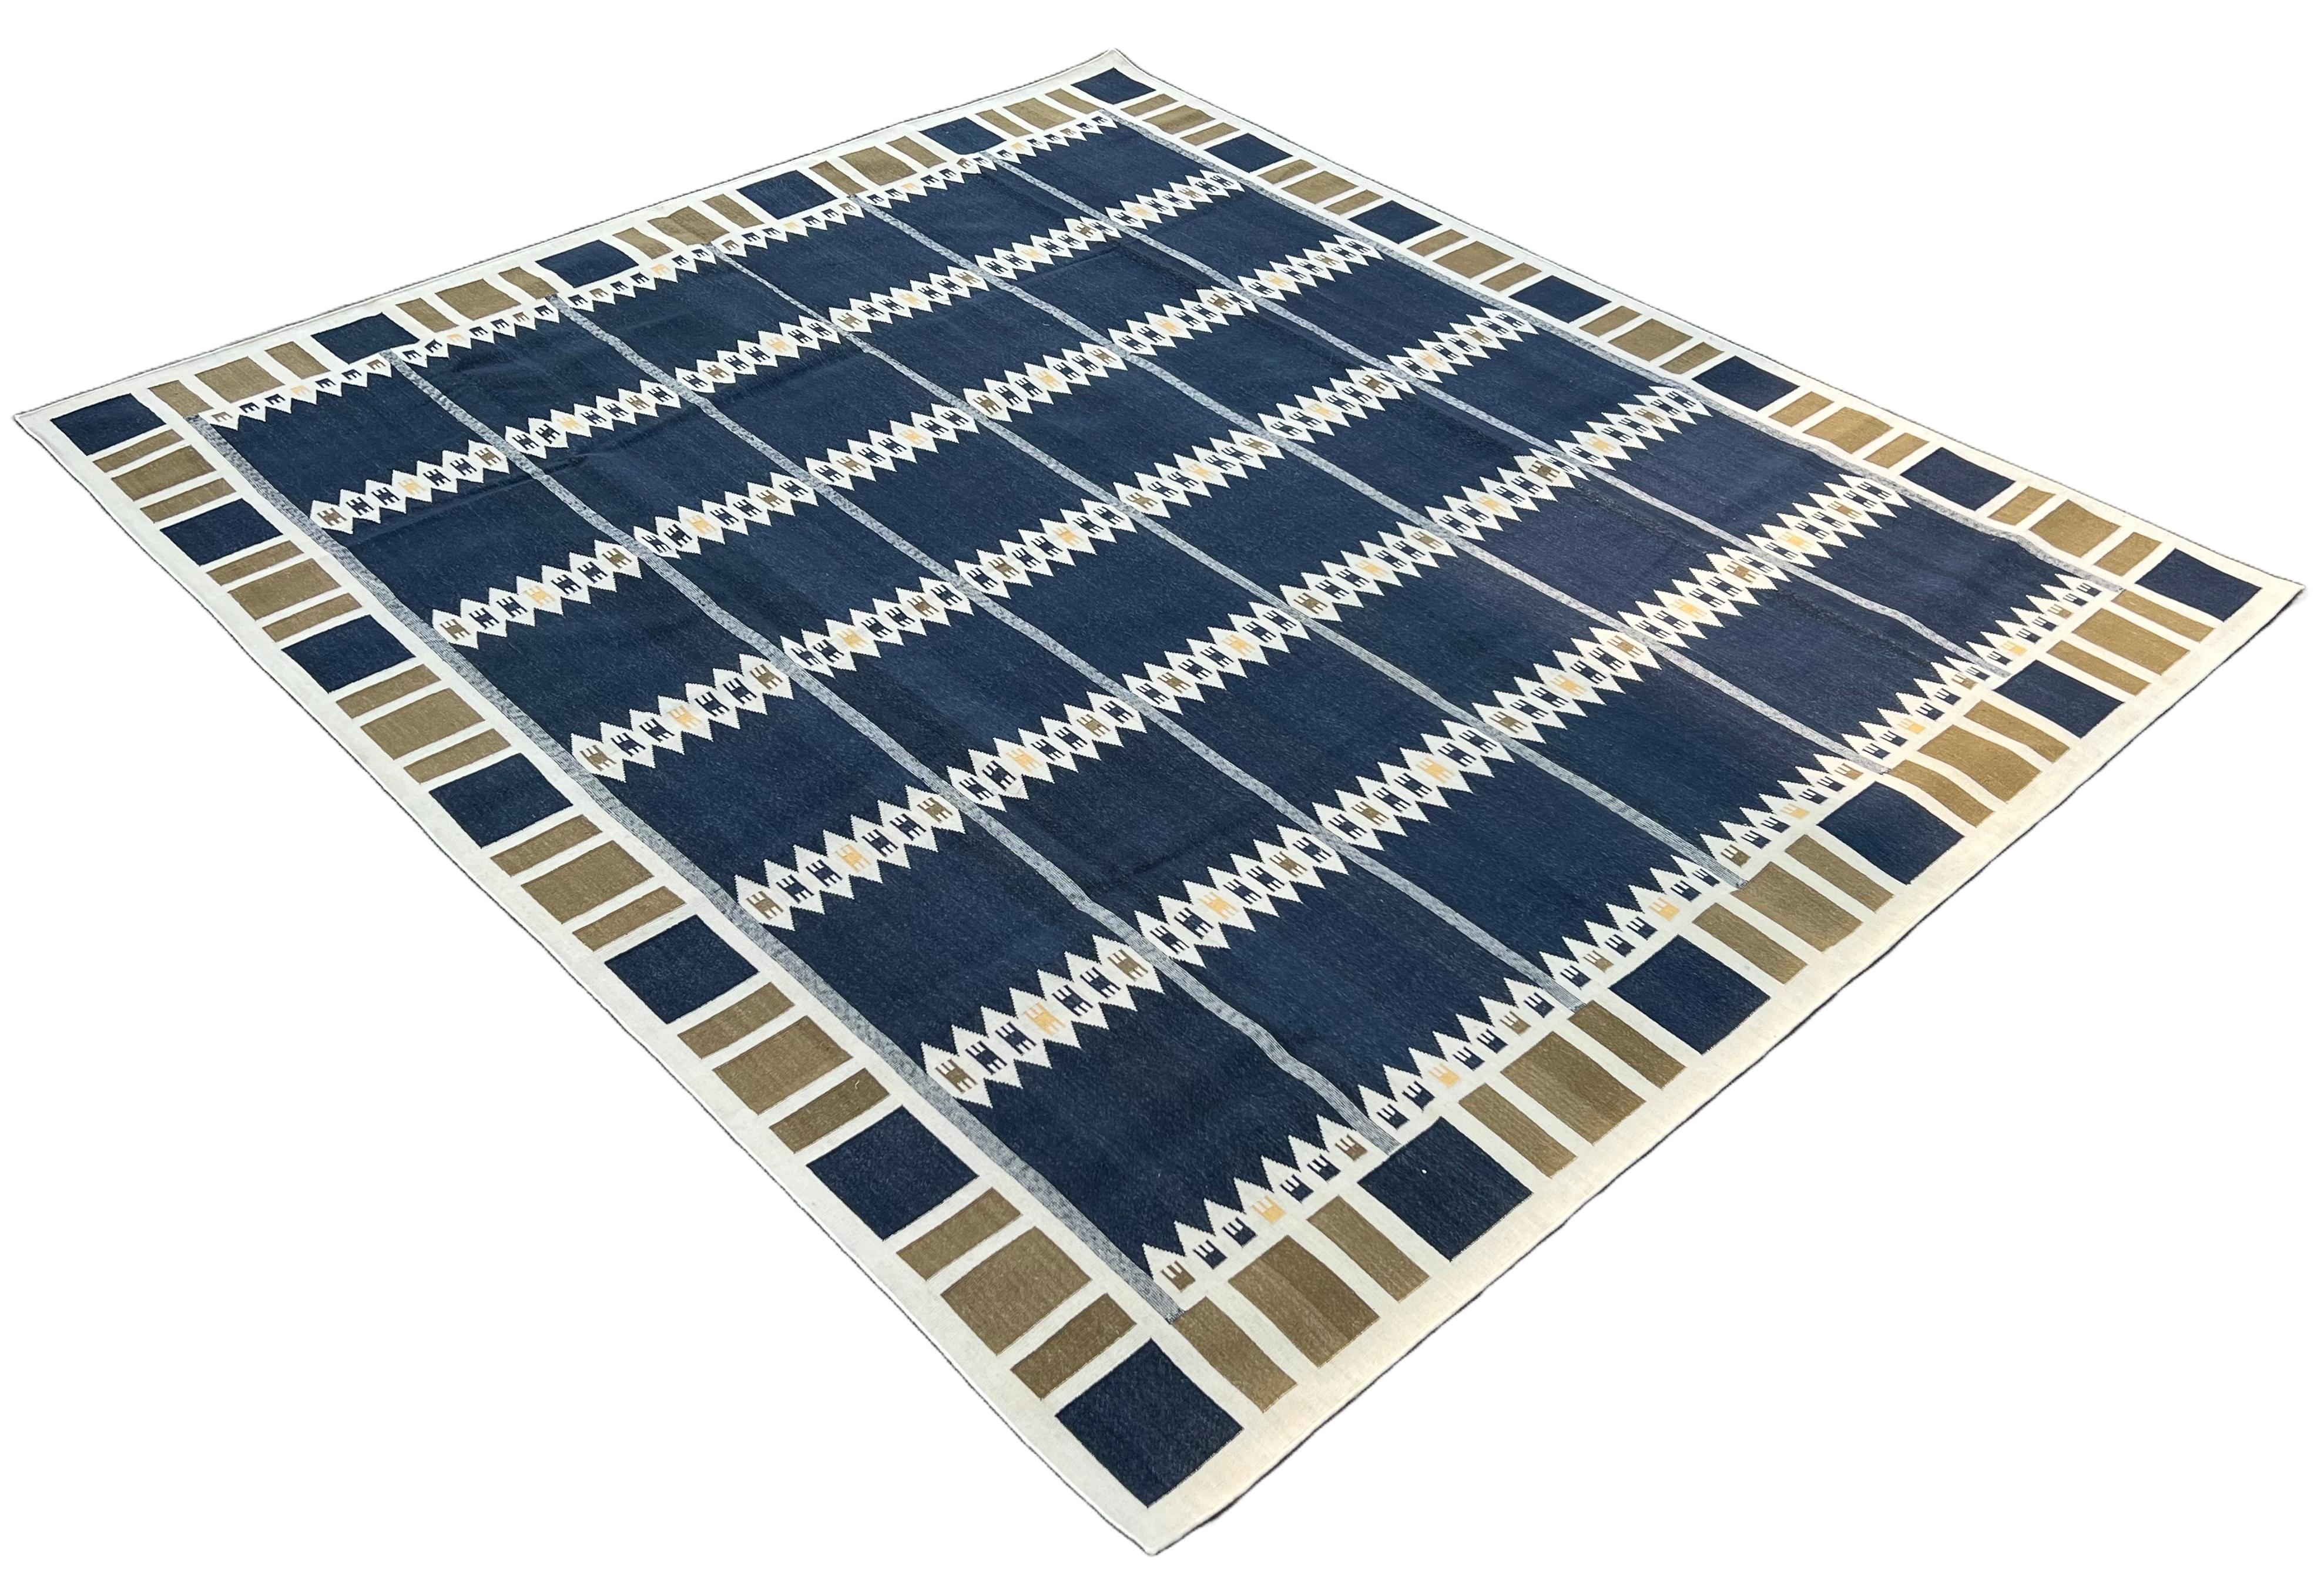 Handmade Cotton Vegetable Dyed Blue, Cream And Brown Geometric Indian Rug - 8'x10'
These special flat-weave dhurries are hand-woven with 15 ply 100% cotton yarn. Due to the special manufacturing techniques used to create our rugs, the size and color